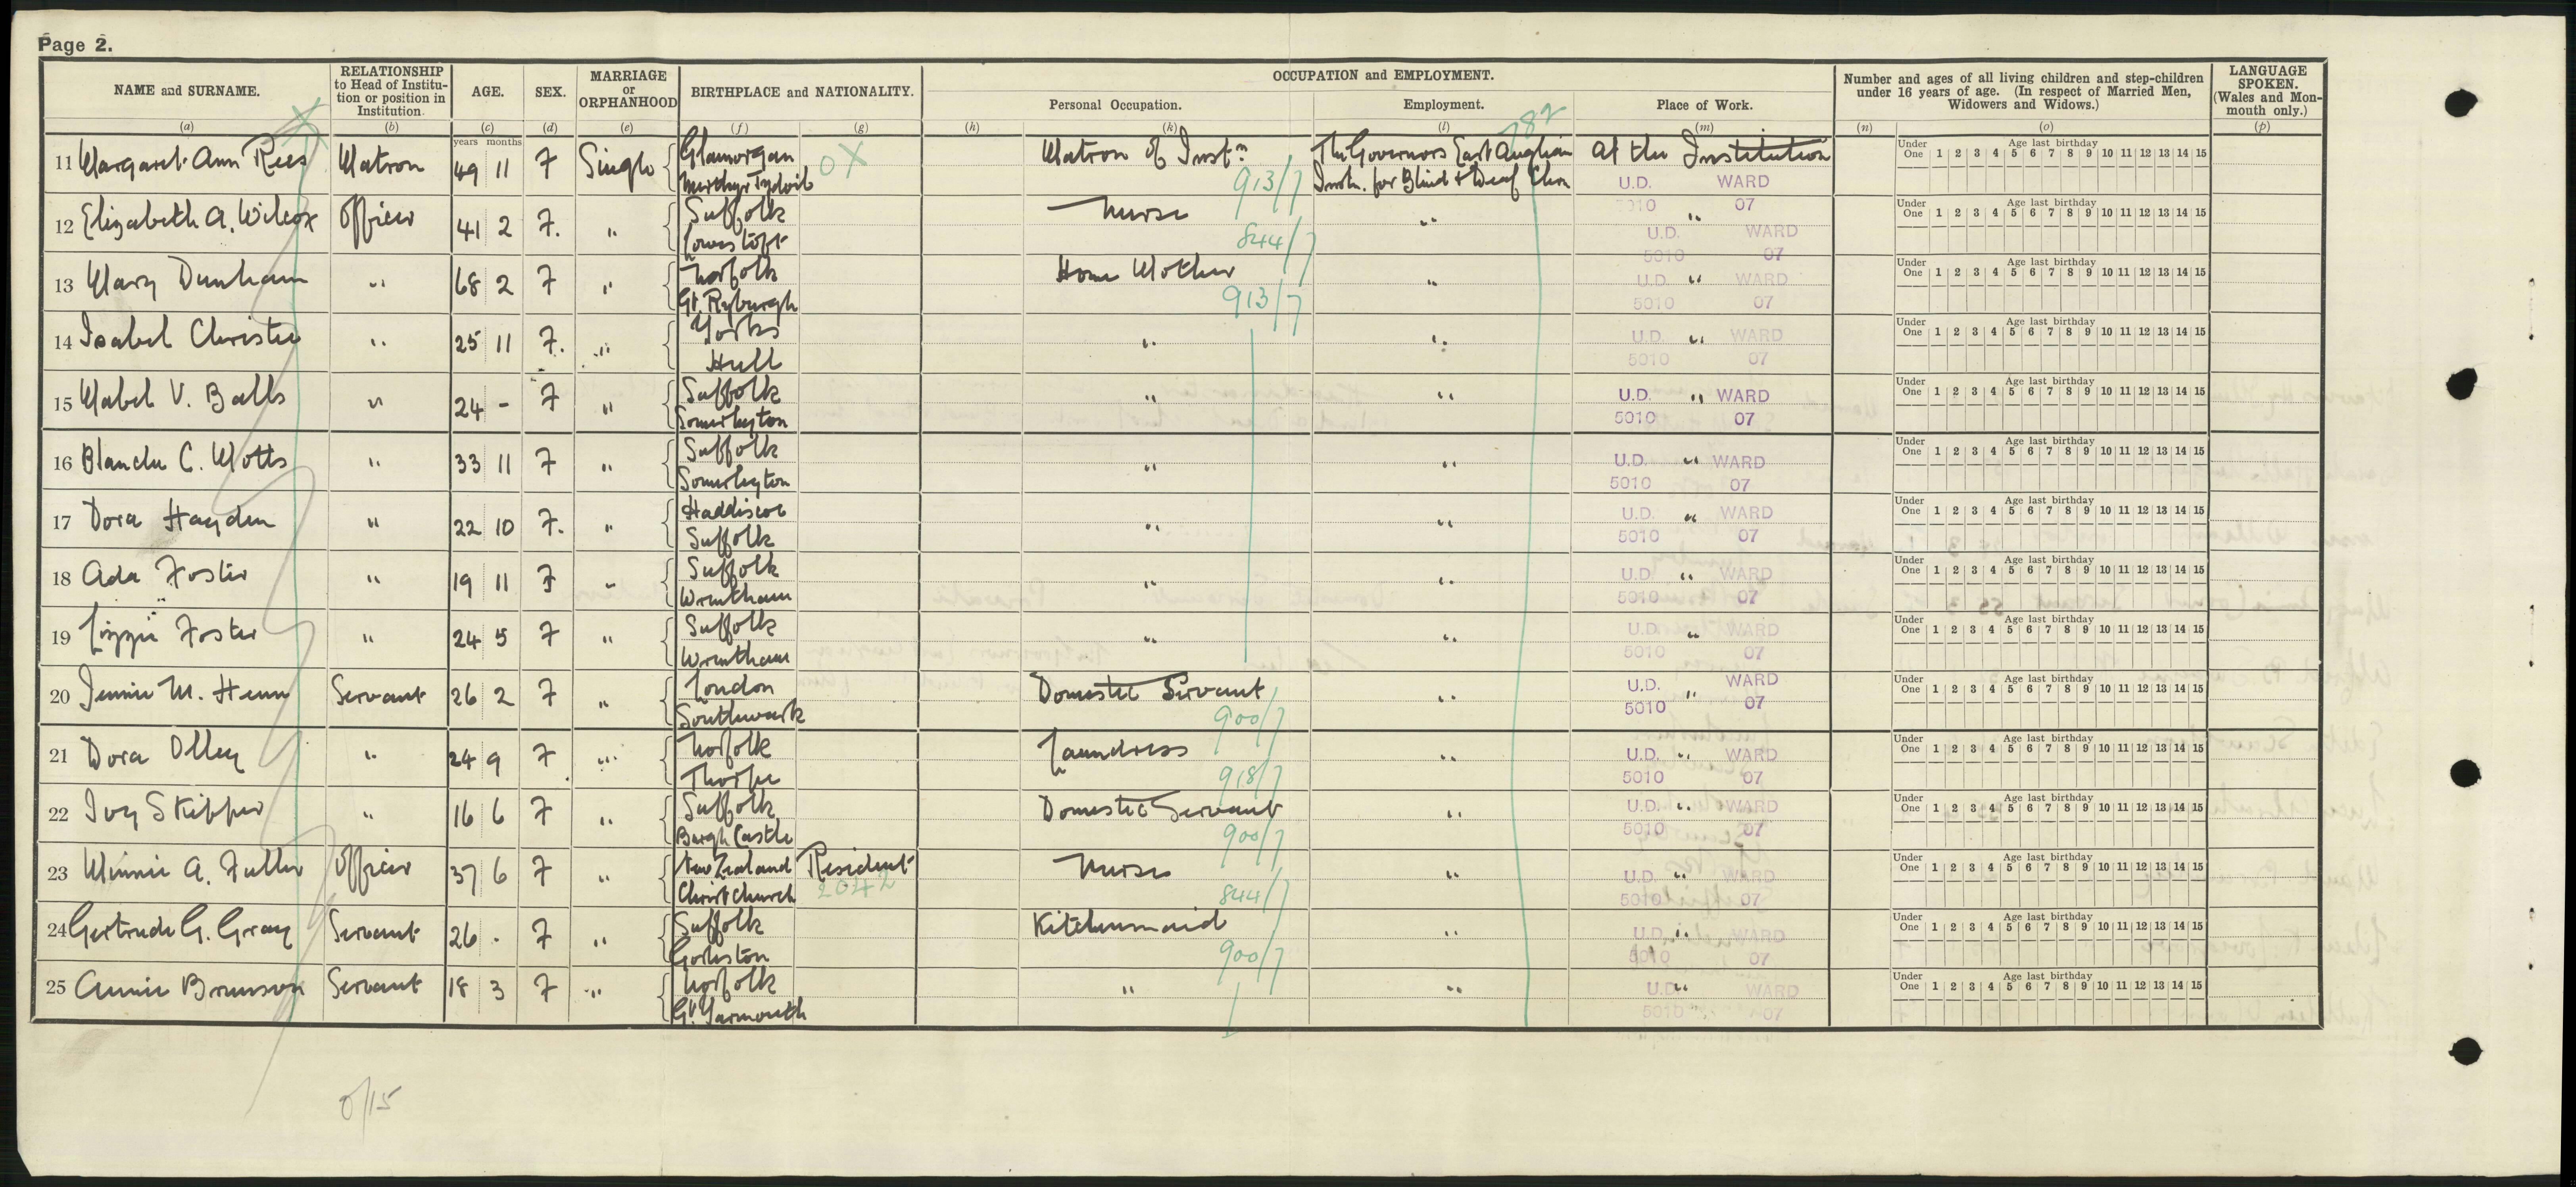 A 1921 Census return for the East Augum Institute for Blind and Deaf Children.